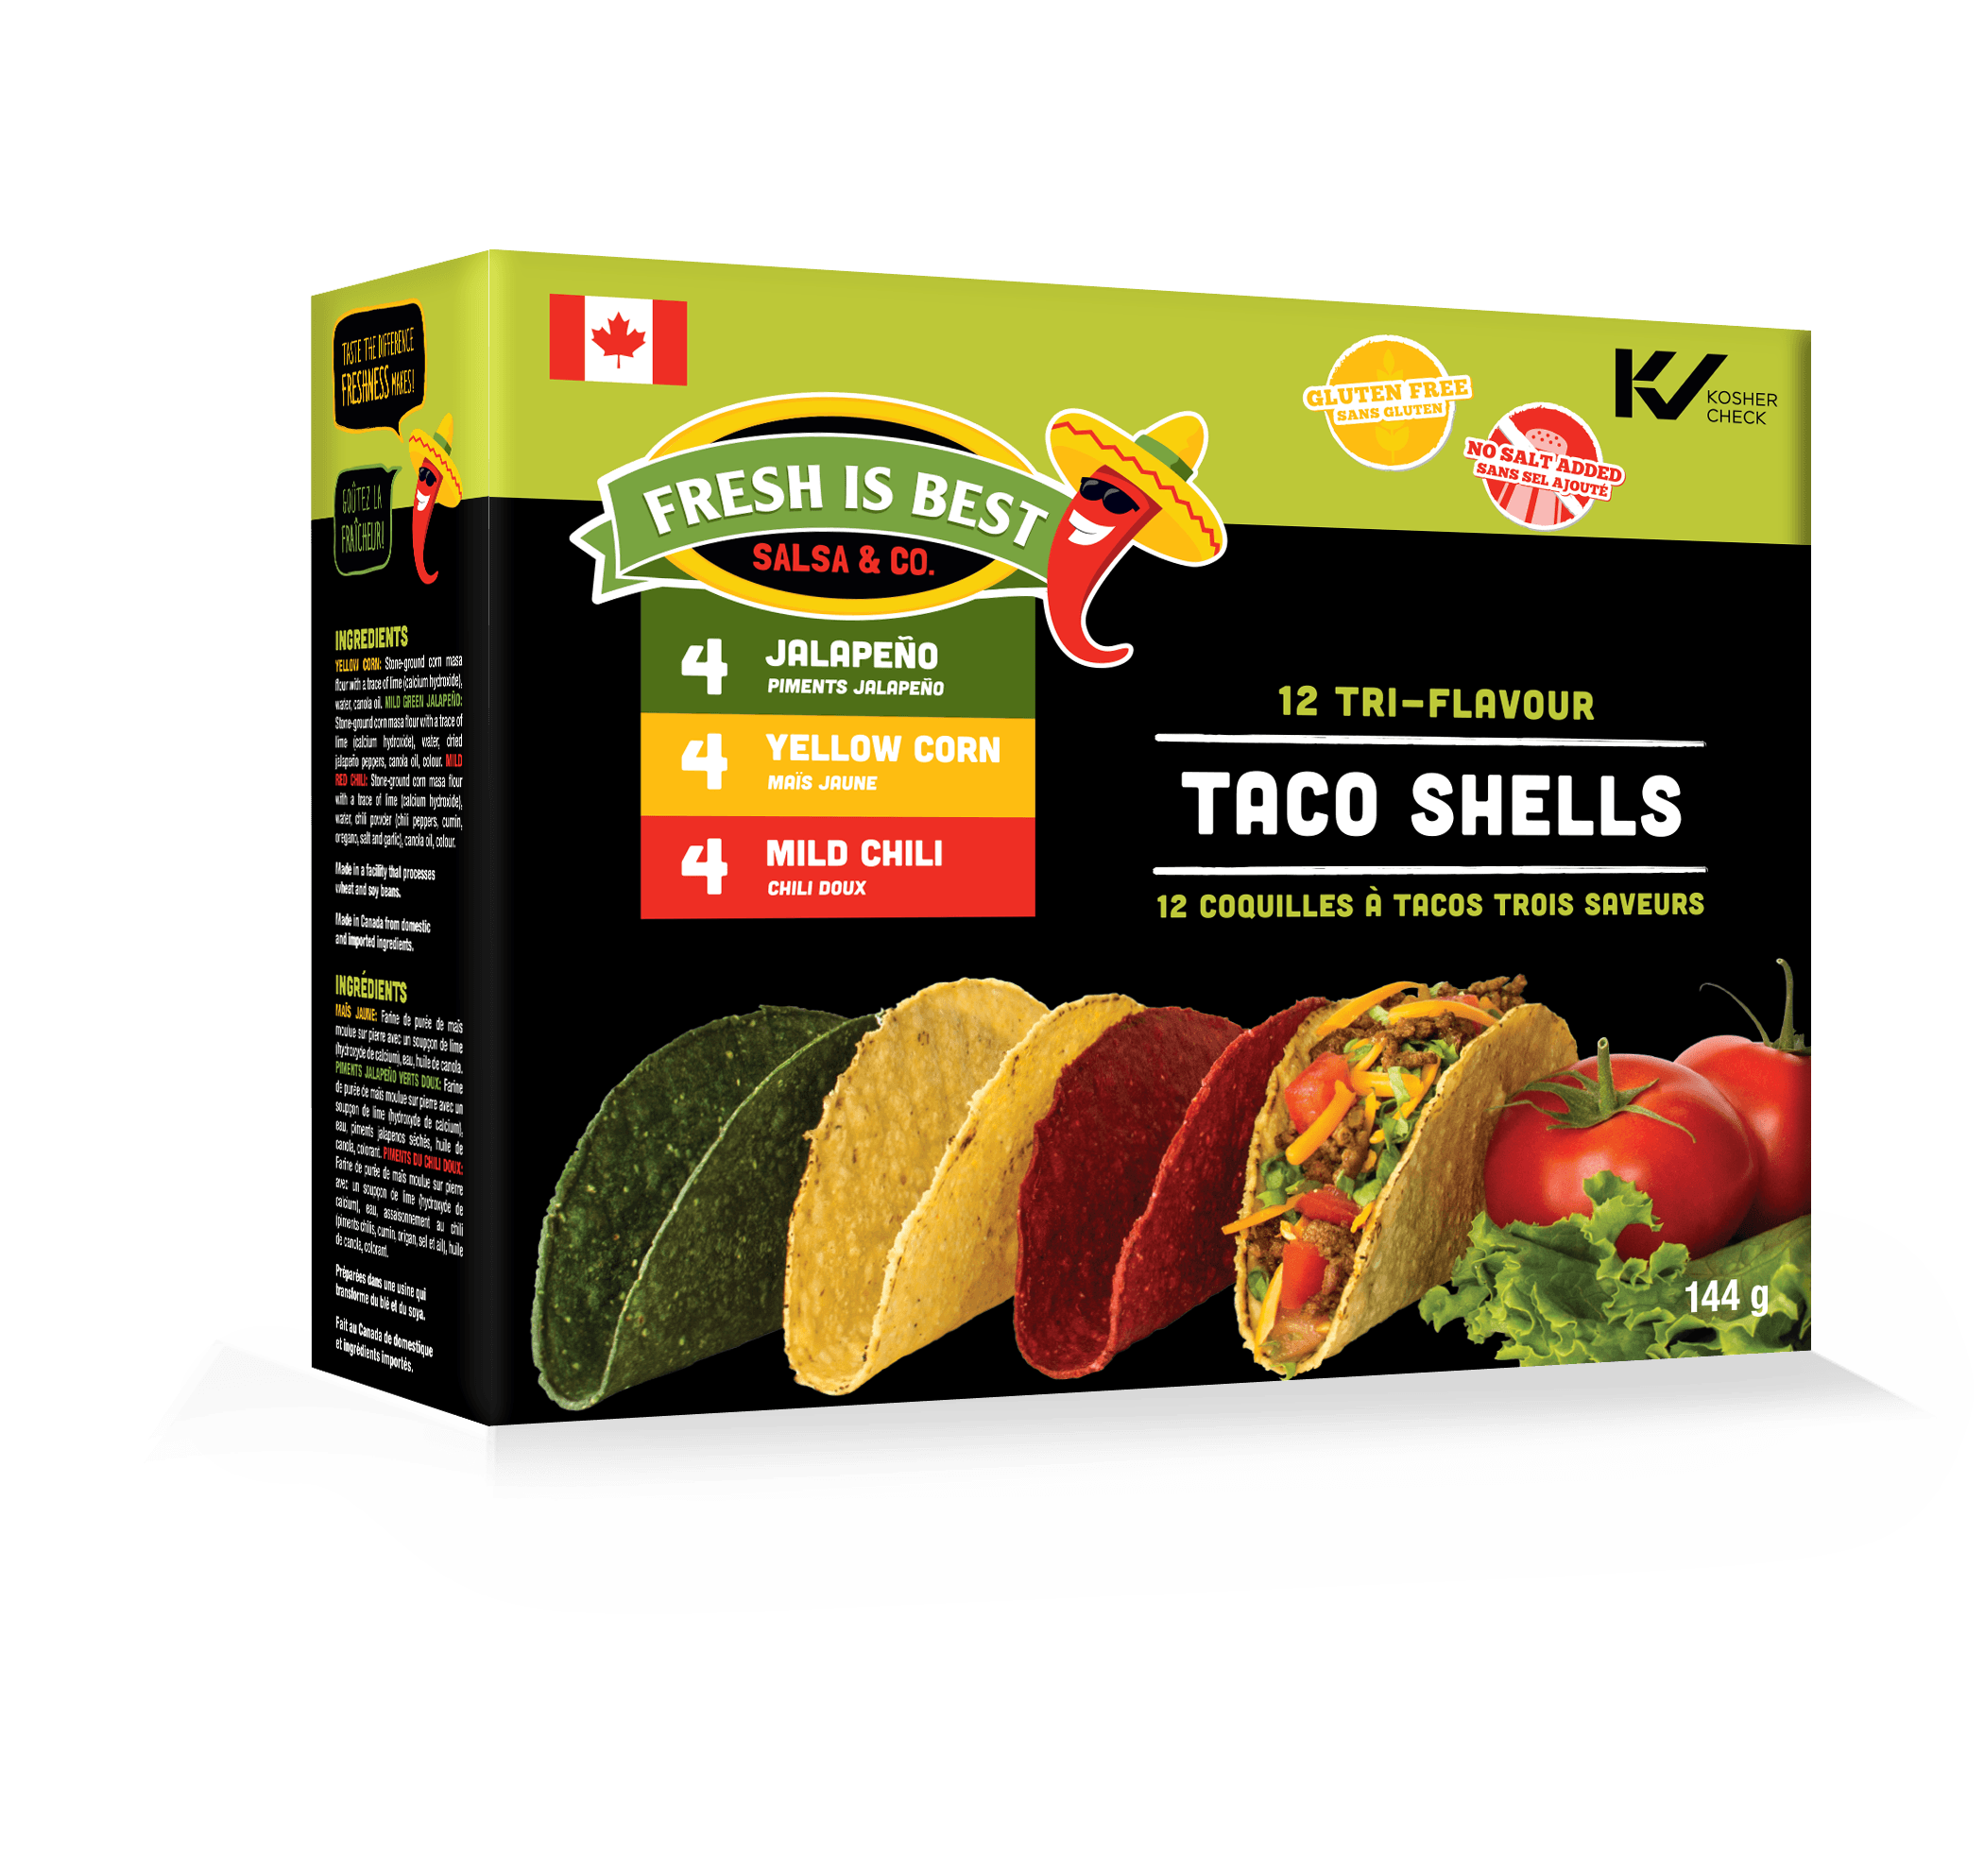 Fresh Is Best Tri-Flavour Taco Shells (Yellow Corn, Jalapeno and Chili) - 144g